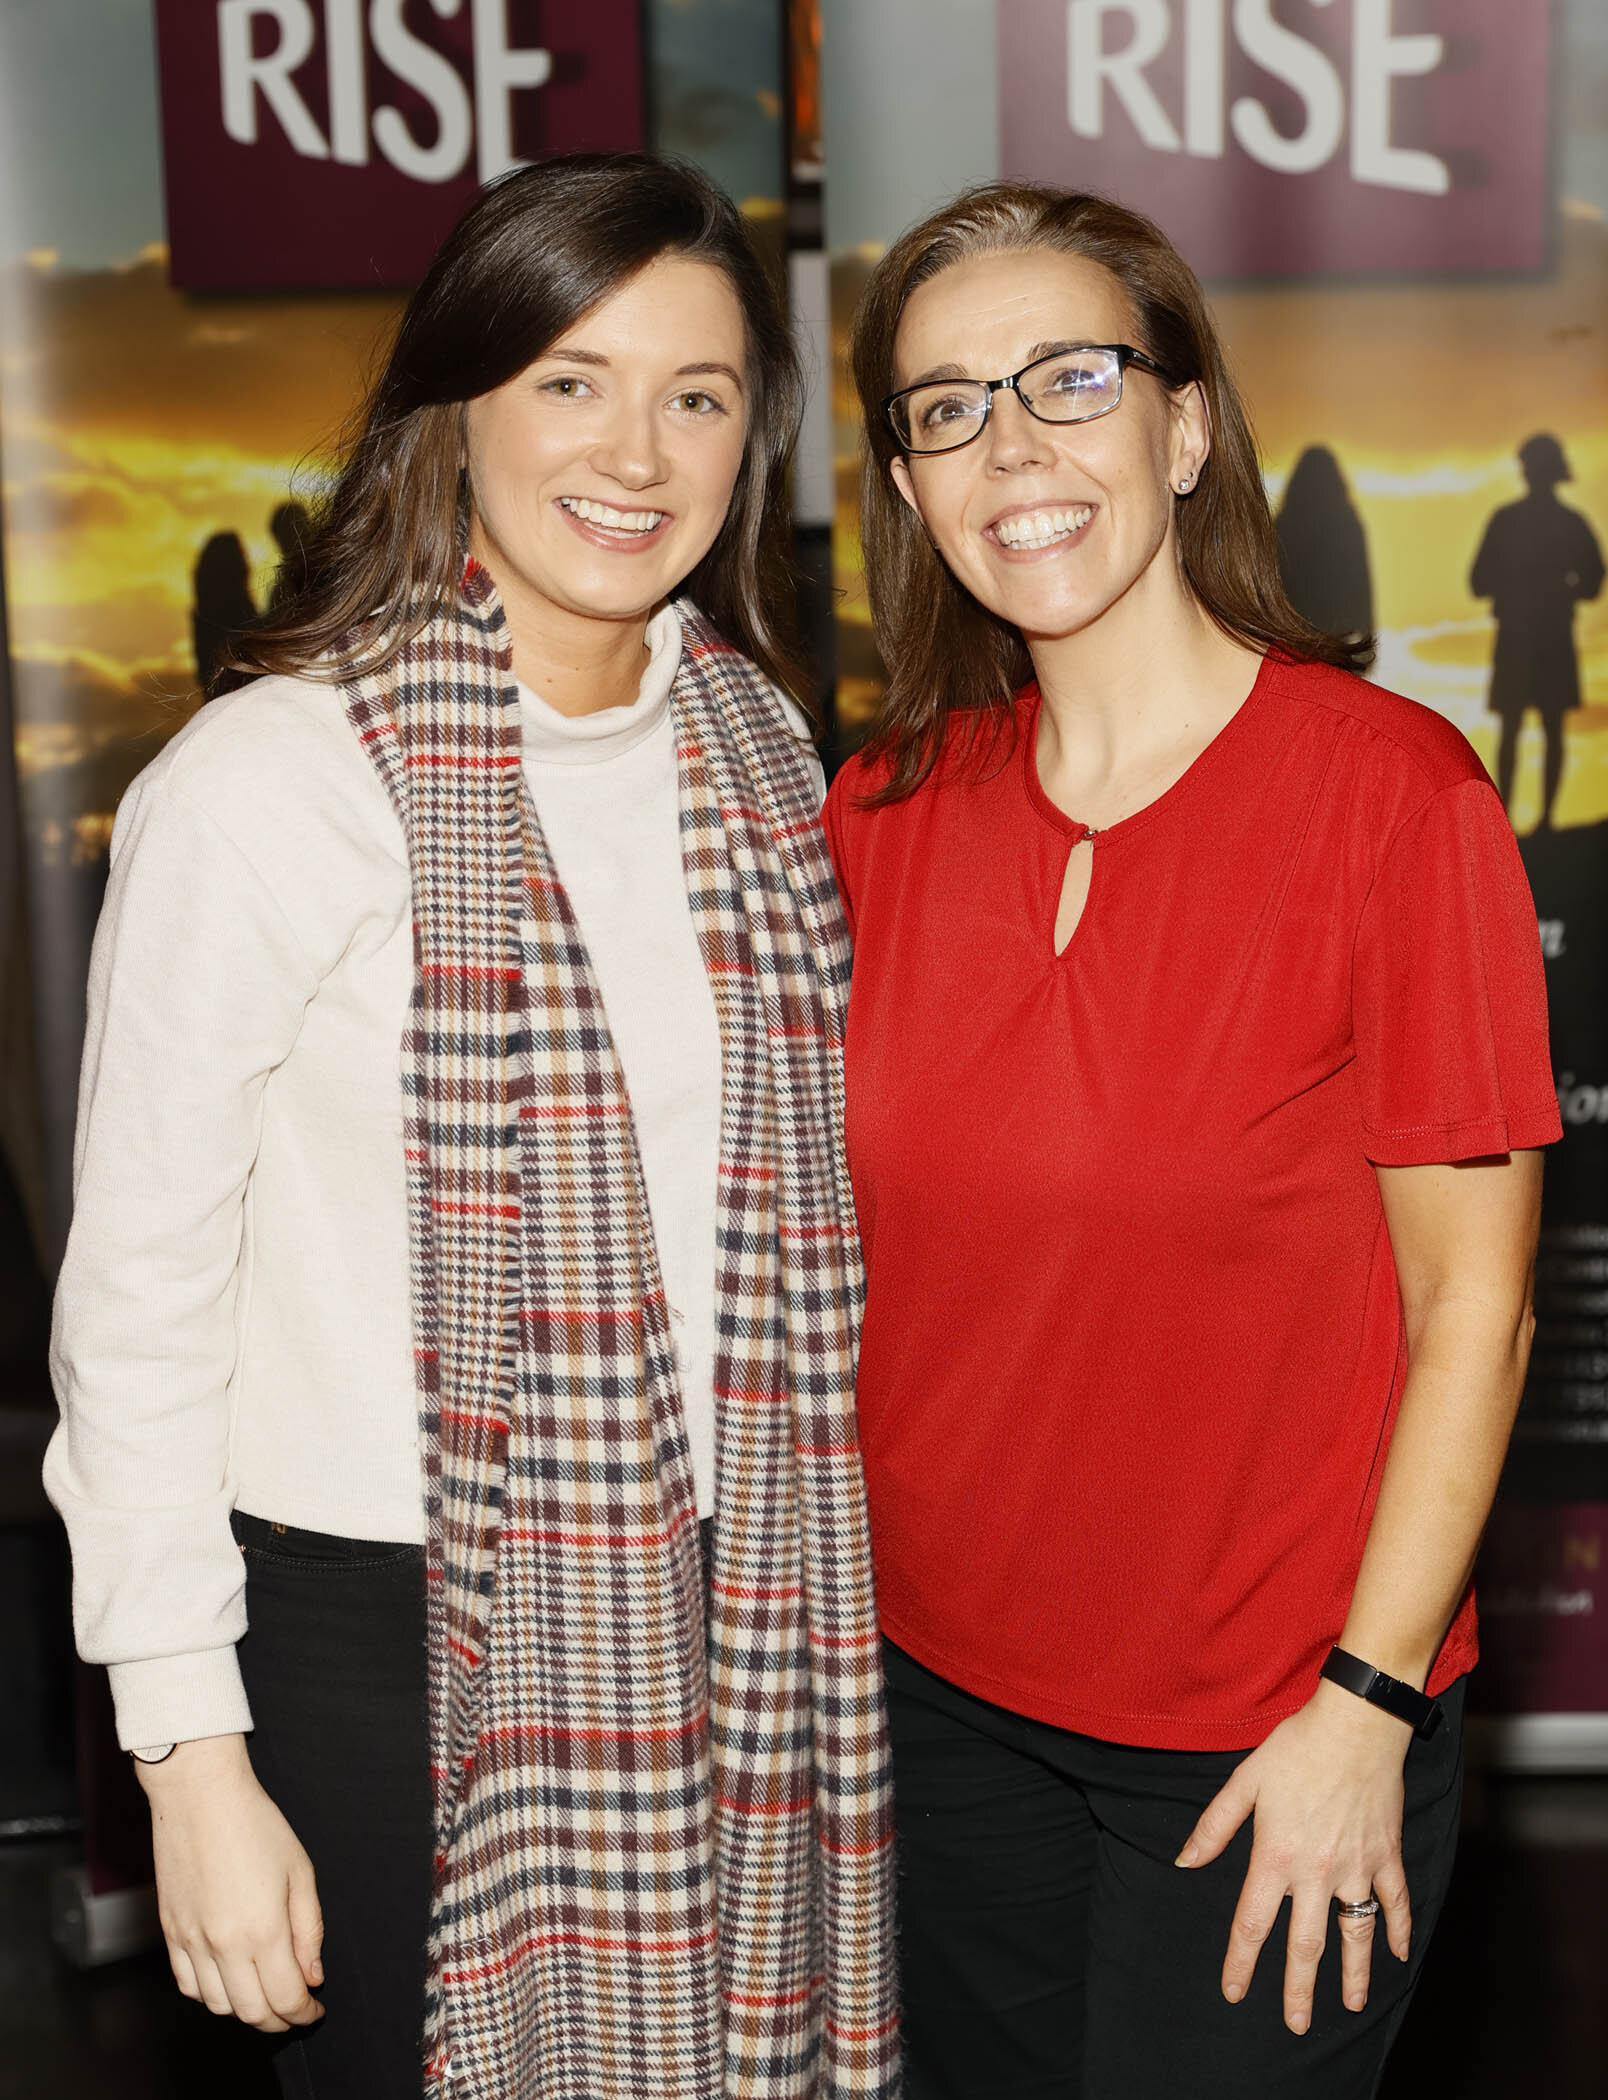 Susan Harte and Jennifer Kelly at the Friends of Rise inaugural lunch in aid of The RISE Foundation.jpg